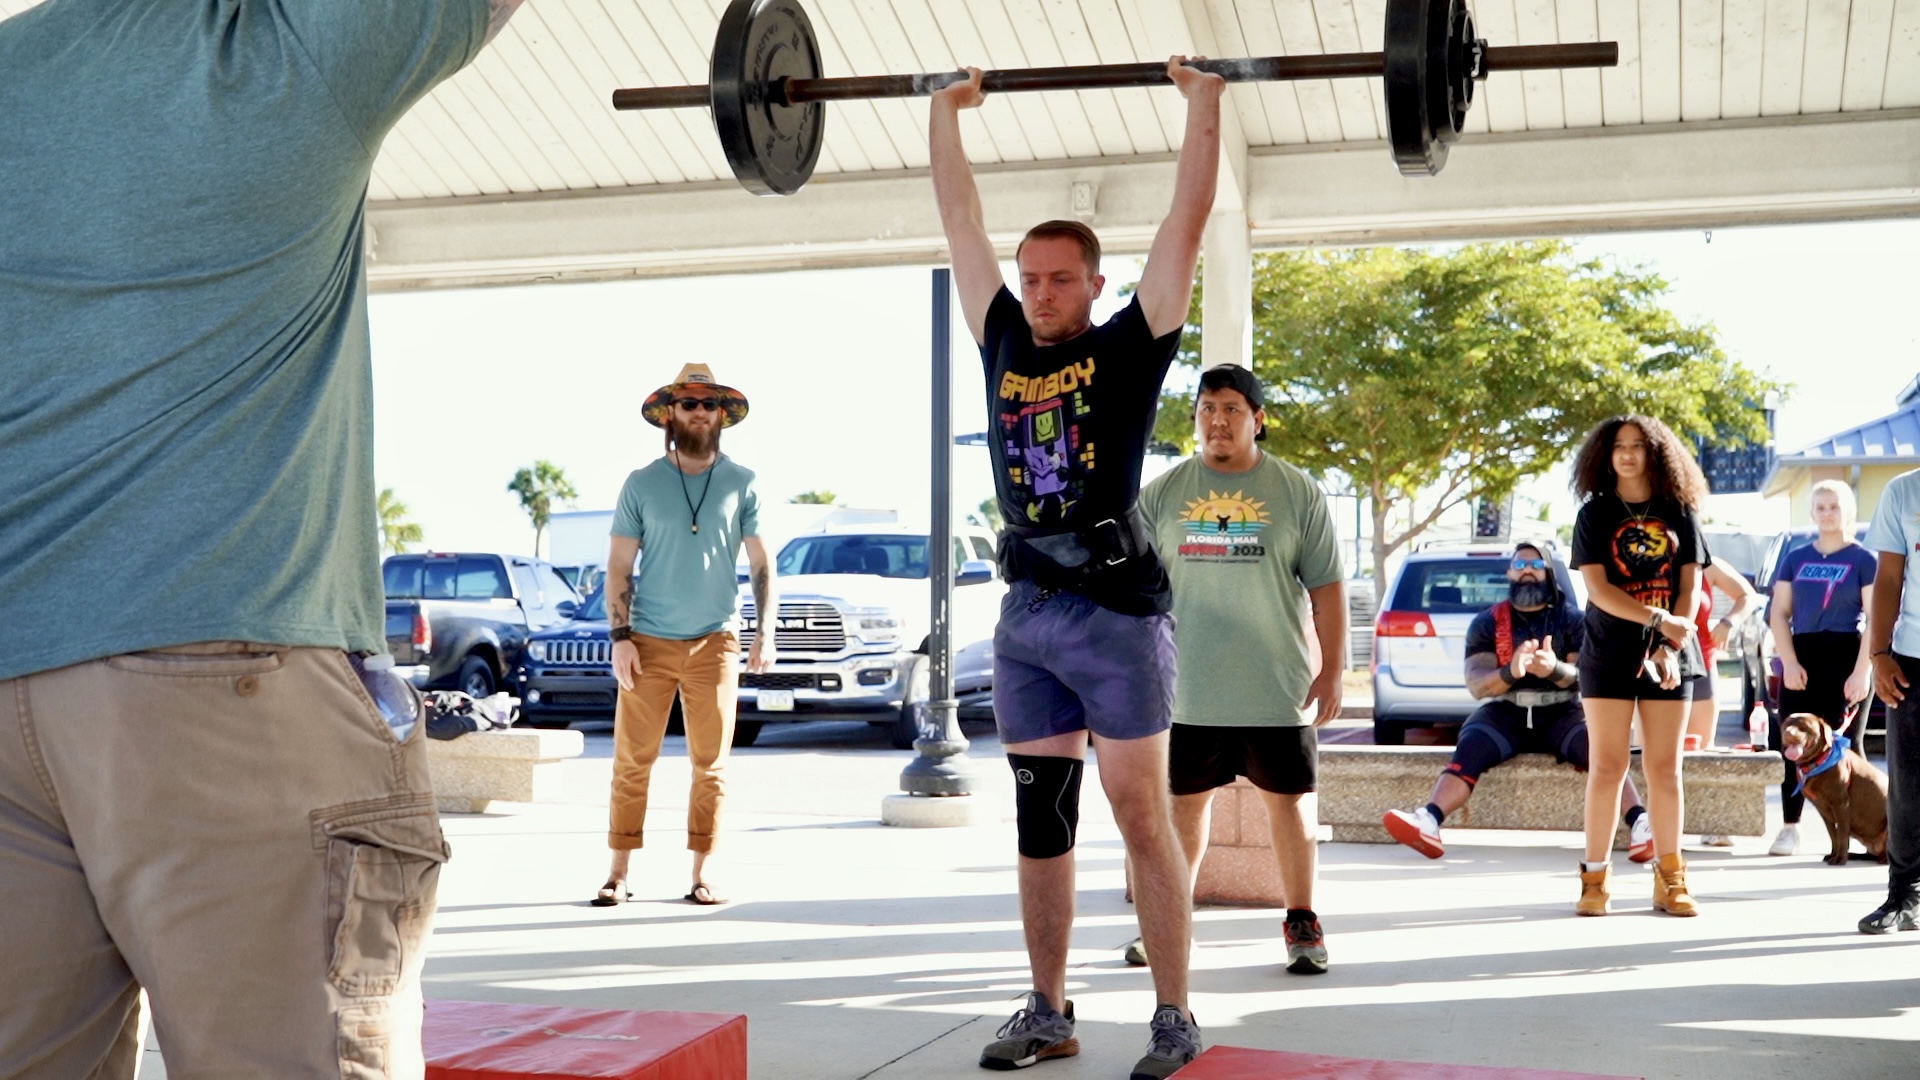 <img src="strongman_split_jerk.jpg" alt="A strongman athlete performing a split jerk lift. He is in a powerful stance, with one leg forward and the other extended back. He is holding a weighted barbell overhead with locked arms, demonstrating strength and stability.">